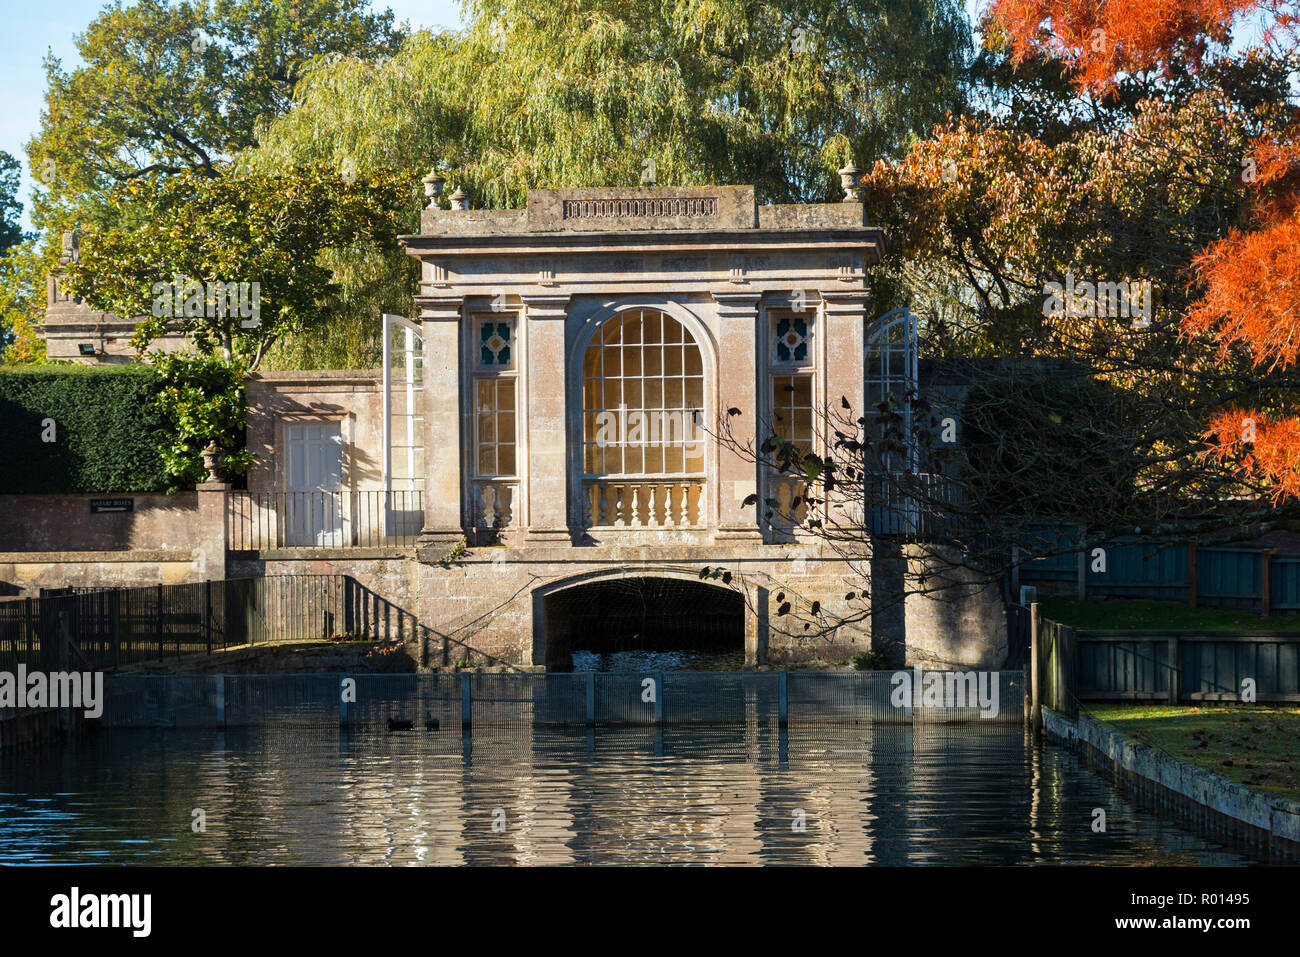 Longleat lake boat house / boathouse; original stone arch for entry to the boathouse from the lake at Longleat House ( stately home and Safari Park ) England UK (103) Stock Photo